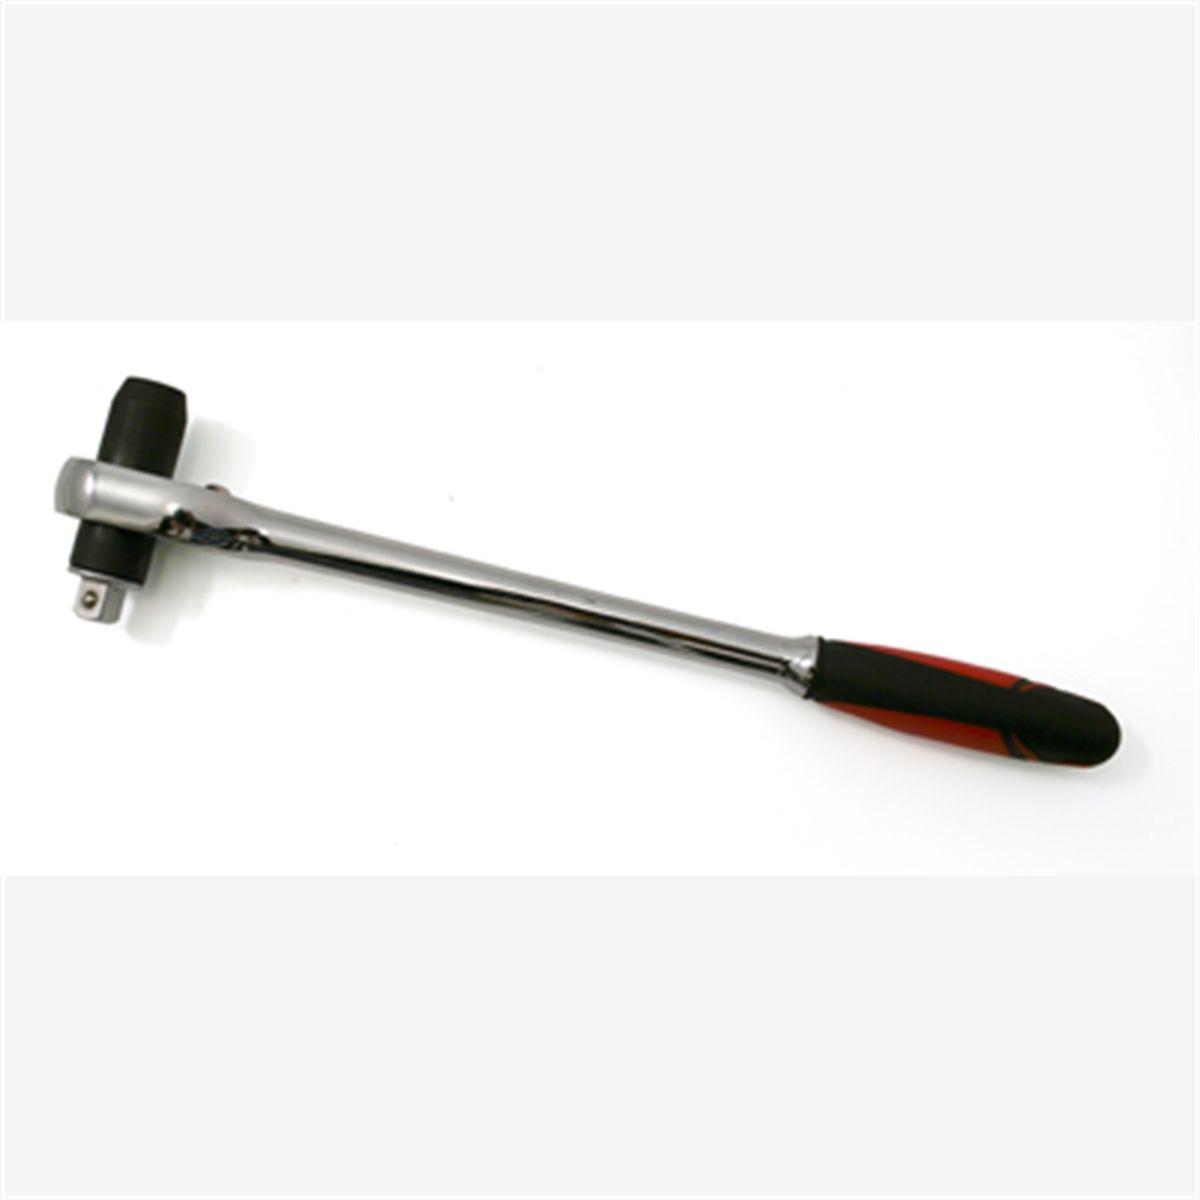 3/8 Inch Drive Torque Limiting Ratchet Wrench